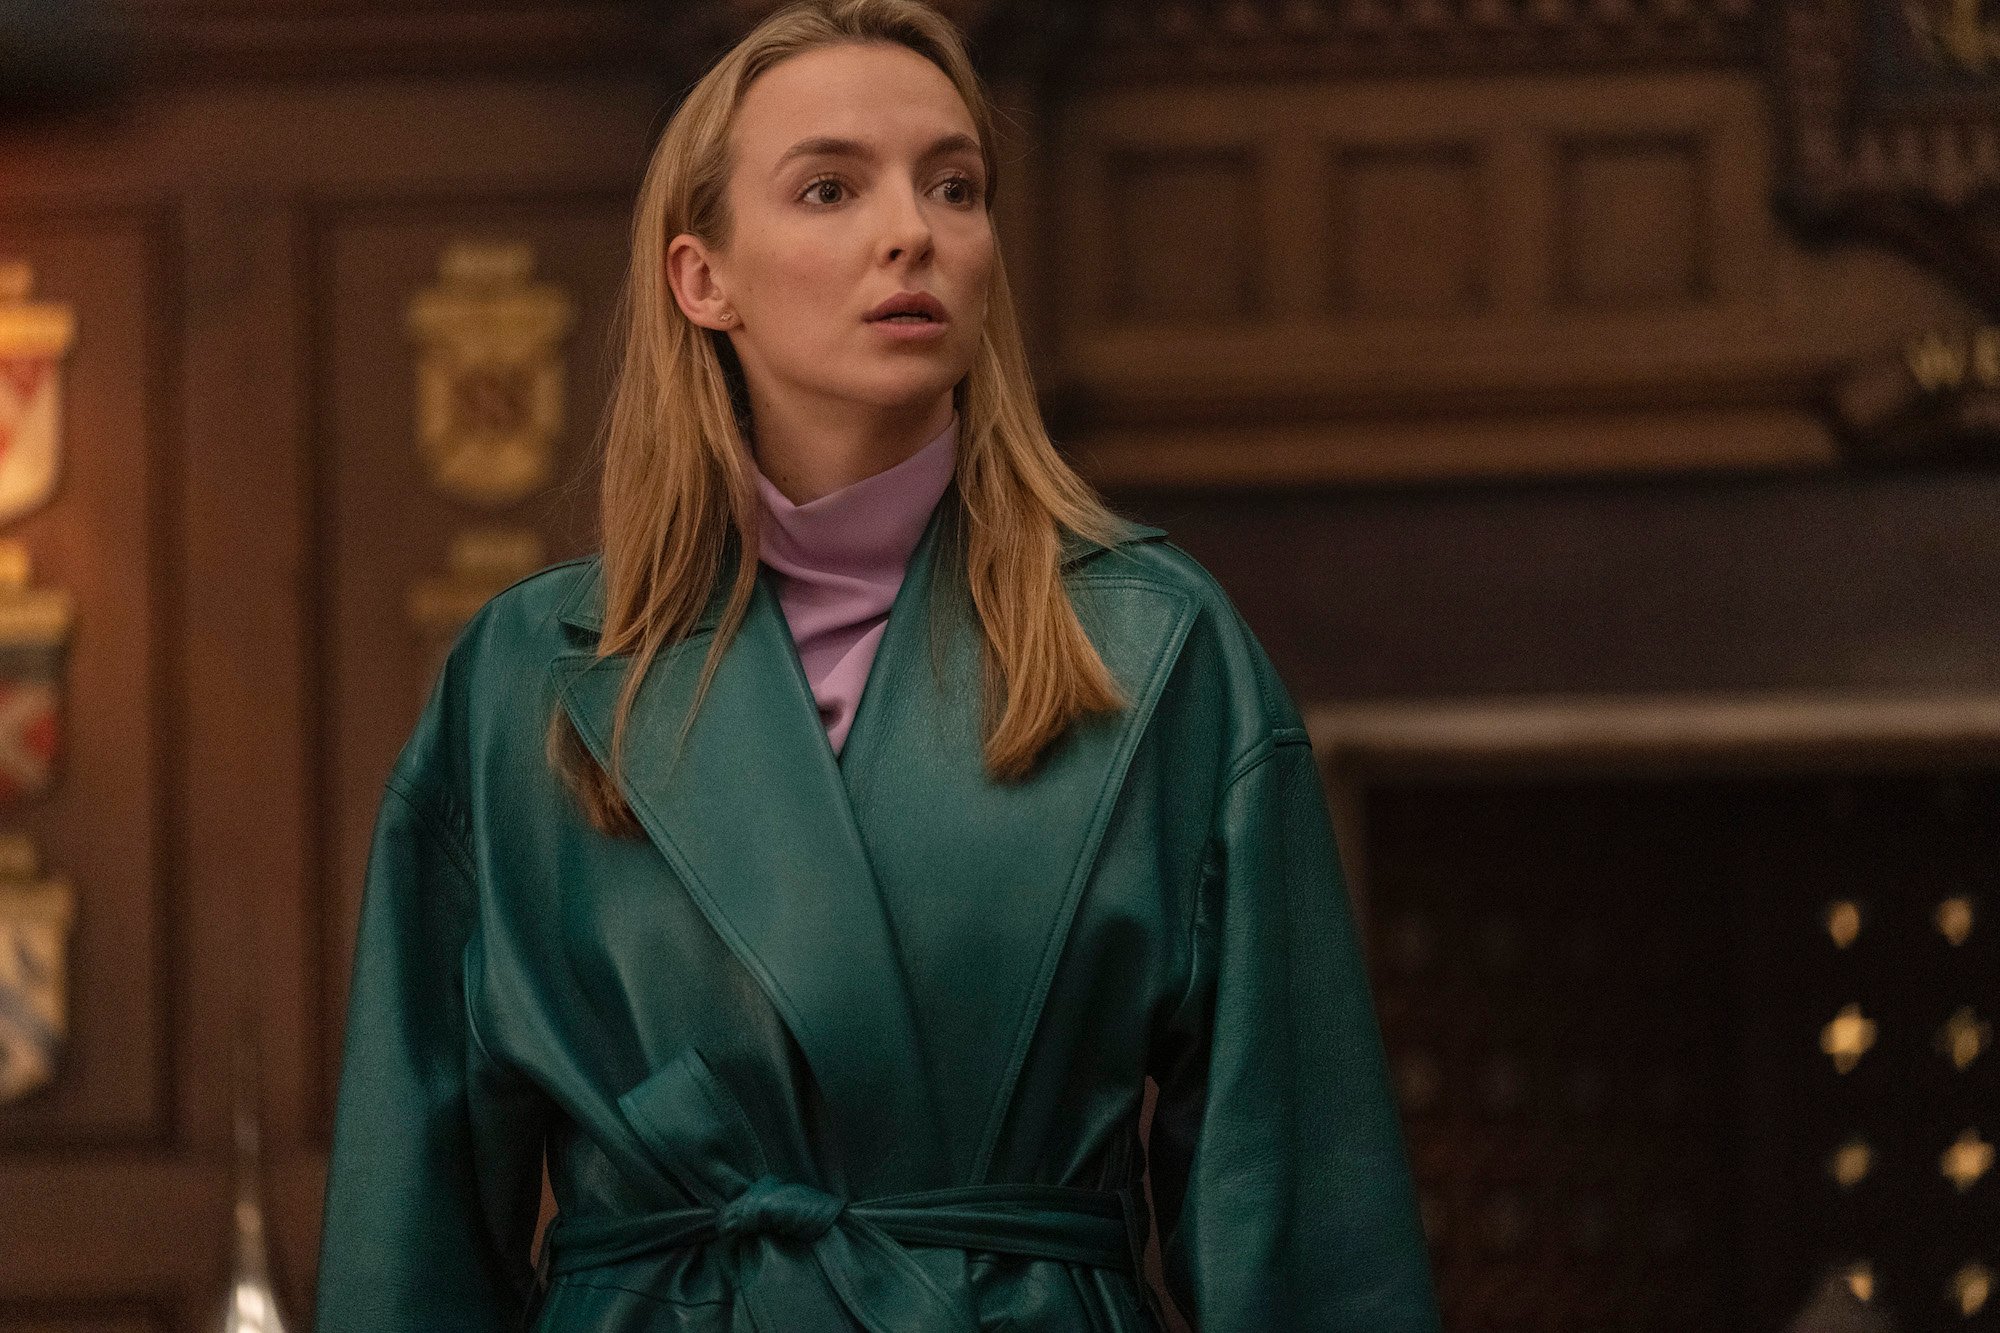 The Reason Jodie Comer’s Russian Accent in ‘Killing Eve’ Is So Good Is Thanks To Her Dad